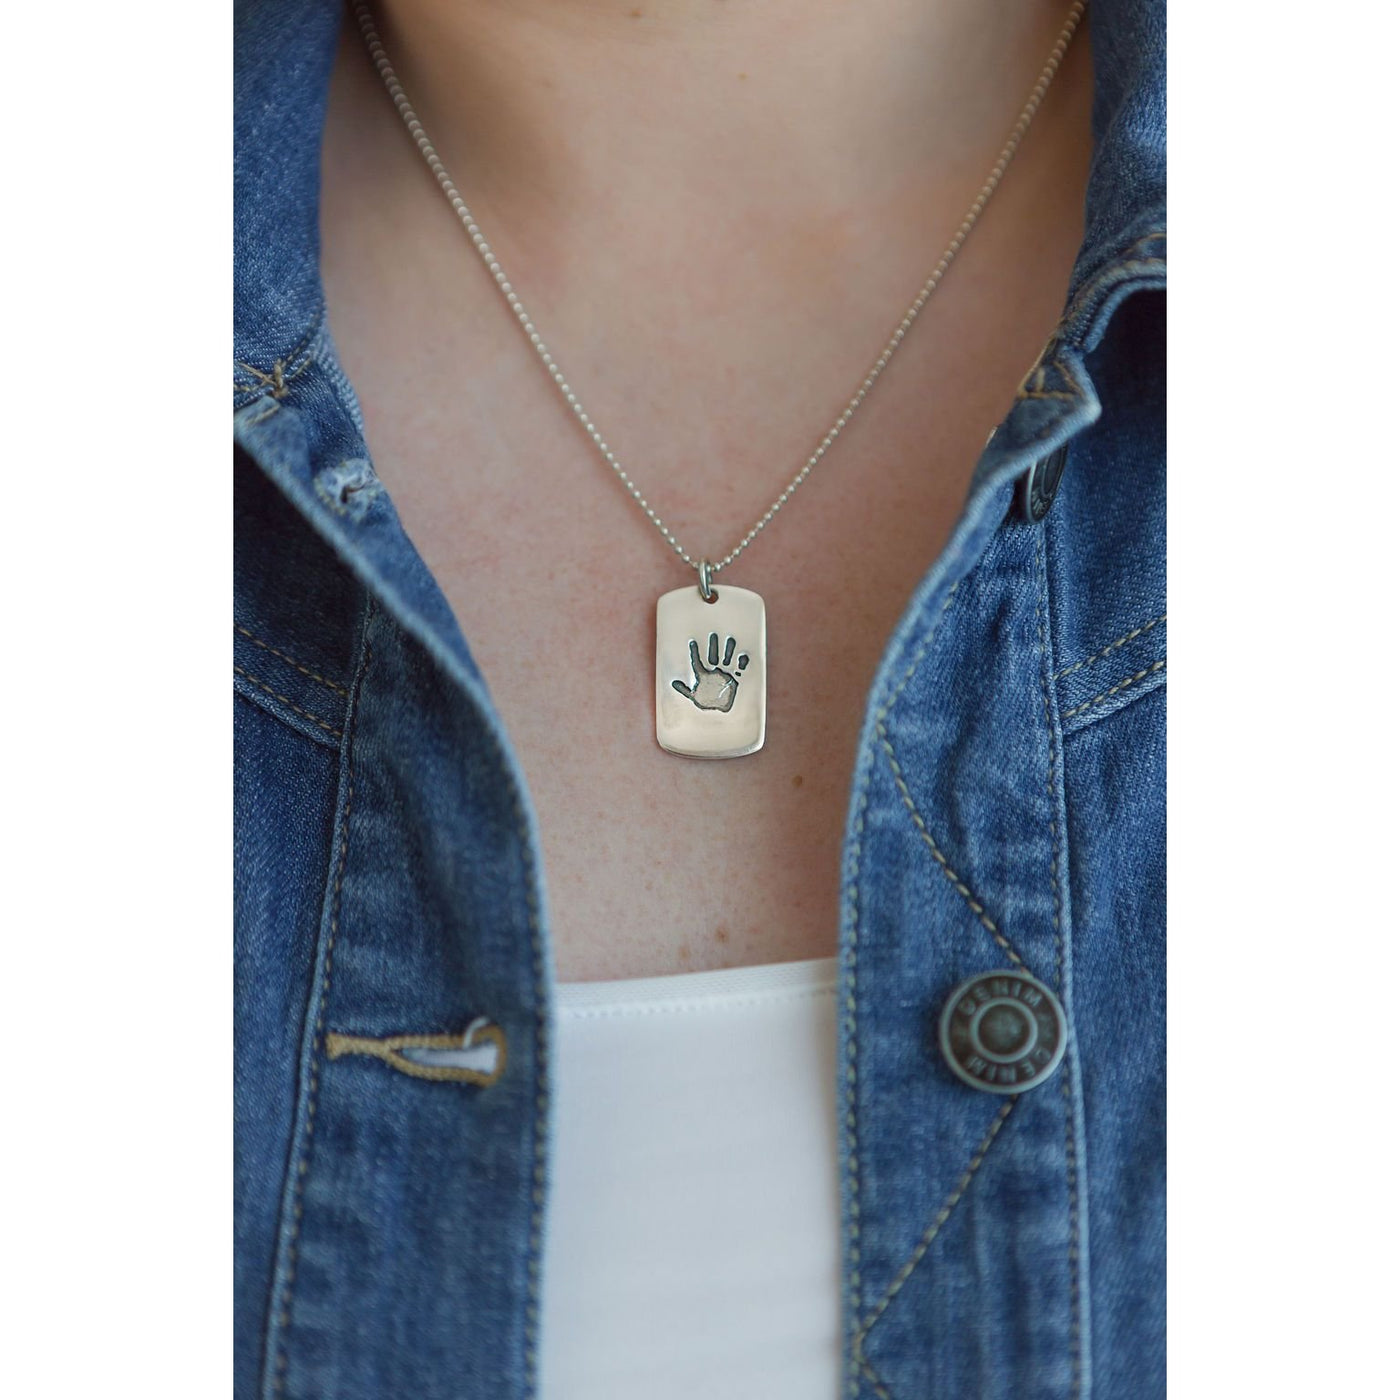 PERSONALIZED HANDPRINT DOG-TAG NECKLACE | forever imprint jewellery